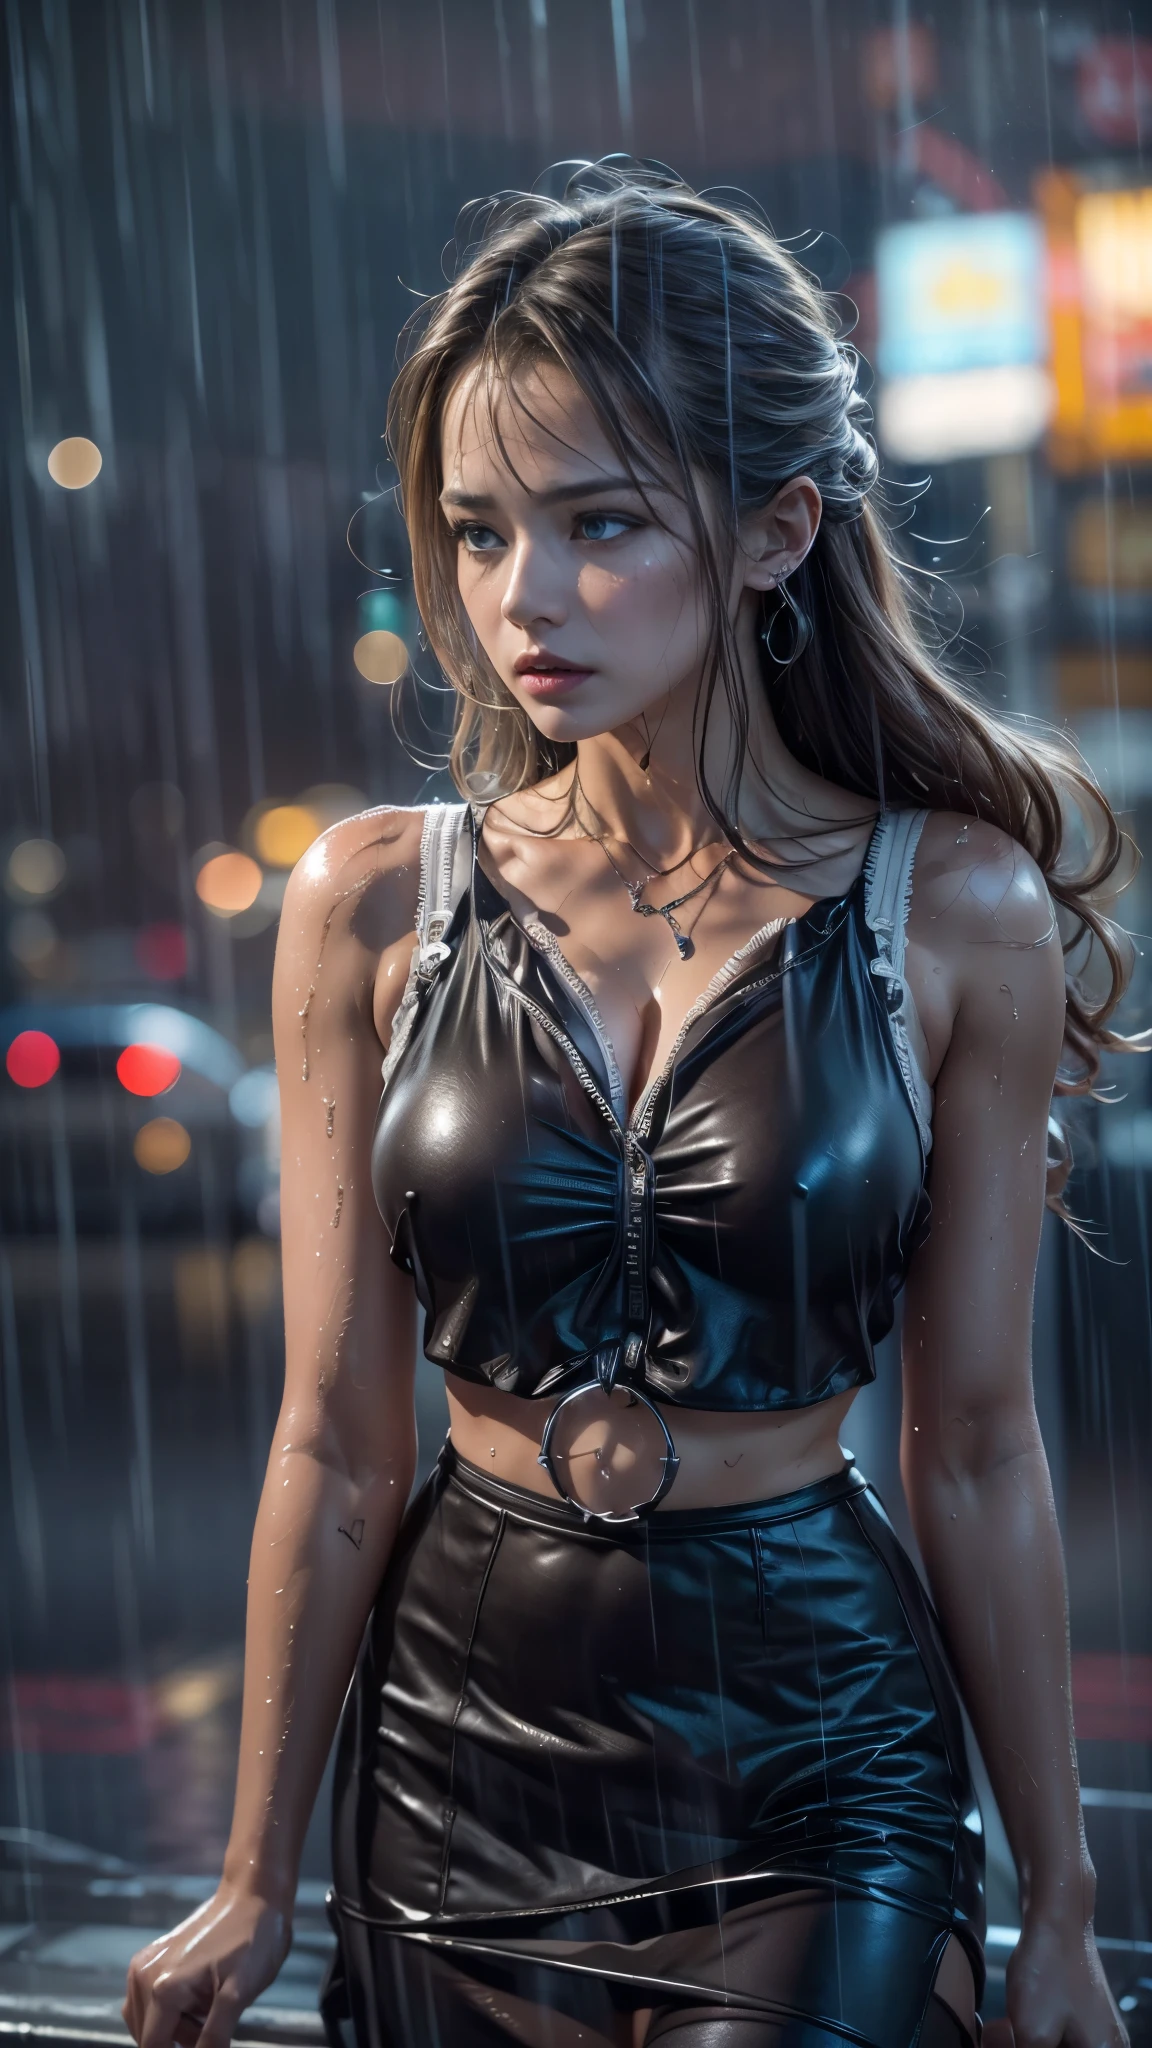 (RAW shooting, Photoreal:1.5, 8K, highest quality, masterpiece, ultra high resolution), perfect dynamic composition:1.2, Night street corner of a modern city, cry:1.3, (((Typhoon heavy rain))), Highly detailed skin and facial textures:1.2, Slim office lady wet in the rain:1.3, sexy beauty:1.1, perfect style:1.2, beautiful and aesthetic:1.1, Fair skin, very beautiful face, water droplets on the skin, (rain drips all over my body:1.2, wet body, wet hair:1.4, wet office skirt:1.2, wet office lady uniform:1.3), belt, (Medium chest, Bra is transparent, Chest gap), (expression of sadness, lovelorn, The expression on your face when you feel intense caress, Facial expression when feeling pleasure), (beautiful blue eyes, Eyes that feel beautiful eros:0.8), (Too erotic:0.9, Bewitching:0.9), cowboy shot, Shoulder bag, necklace, earrings, bracelet, clock